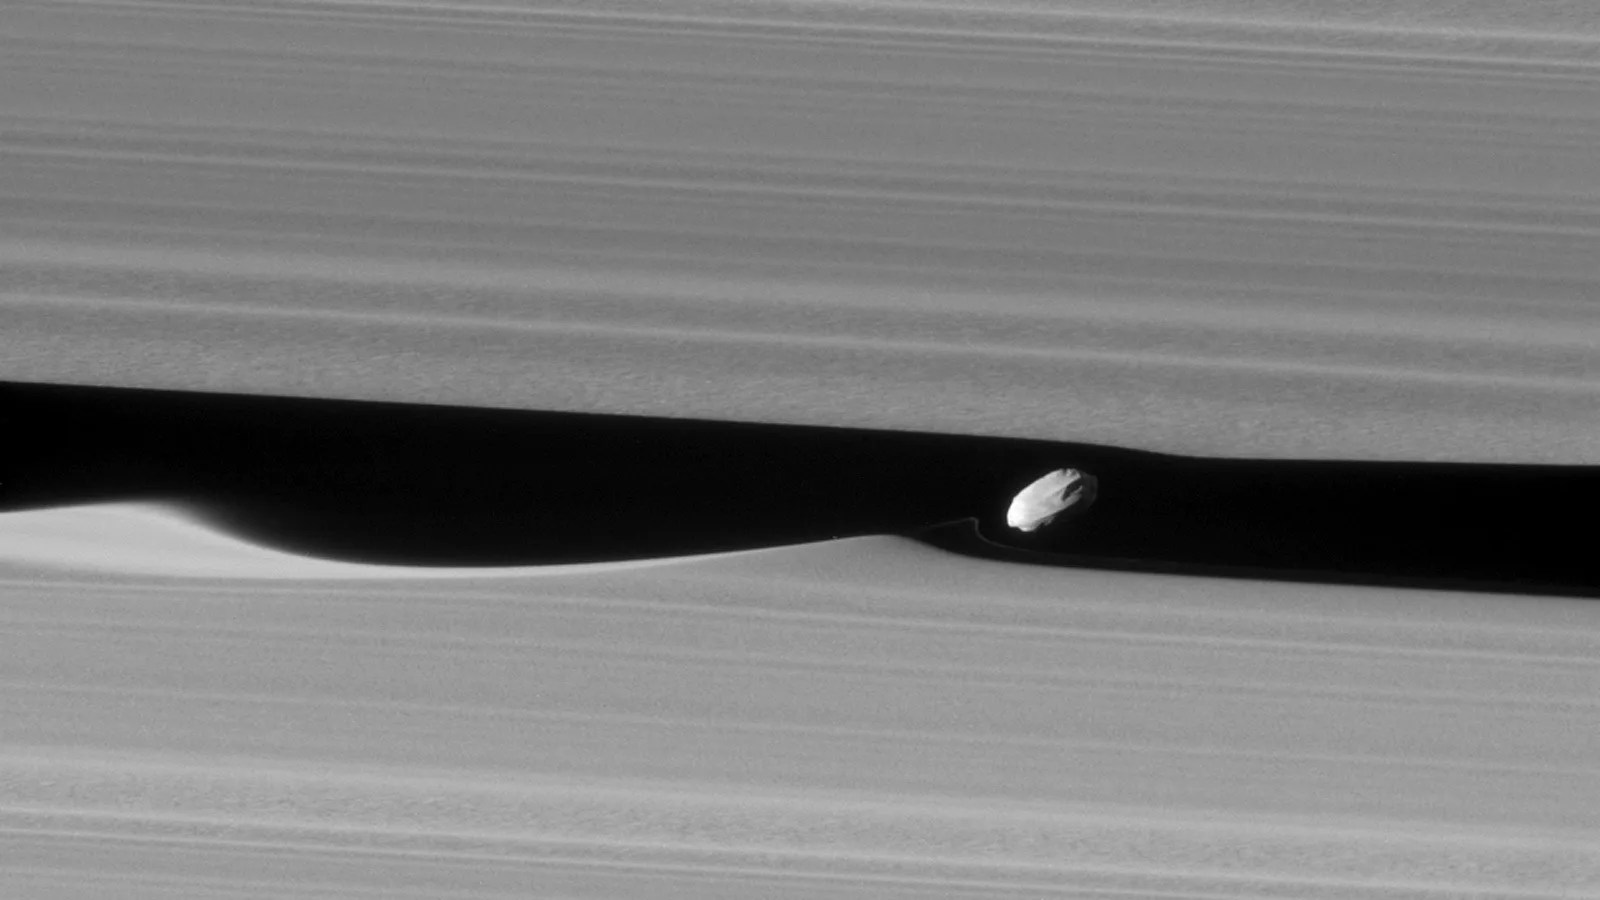 Daphnis and Saturn's rings